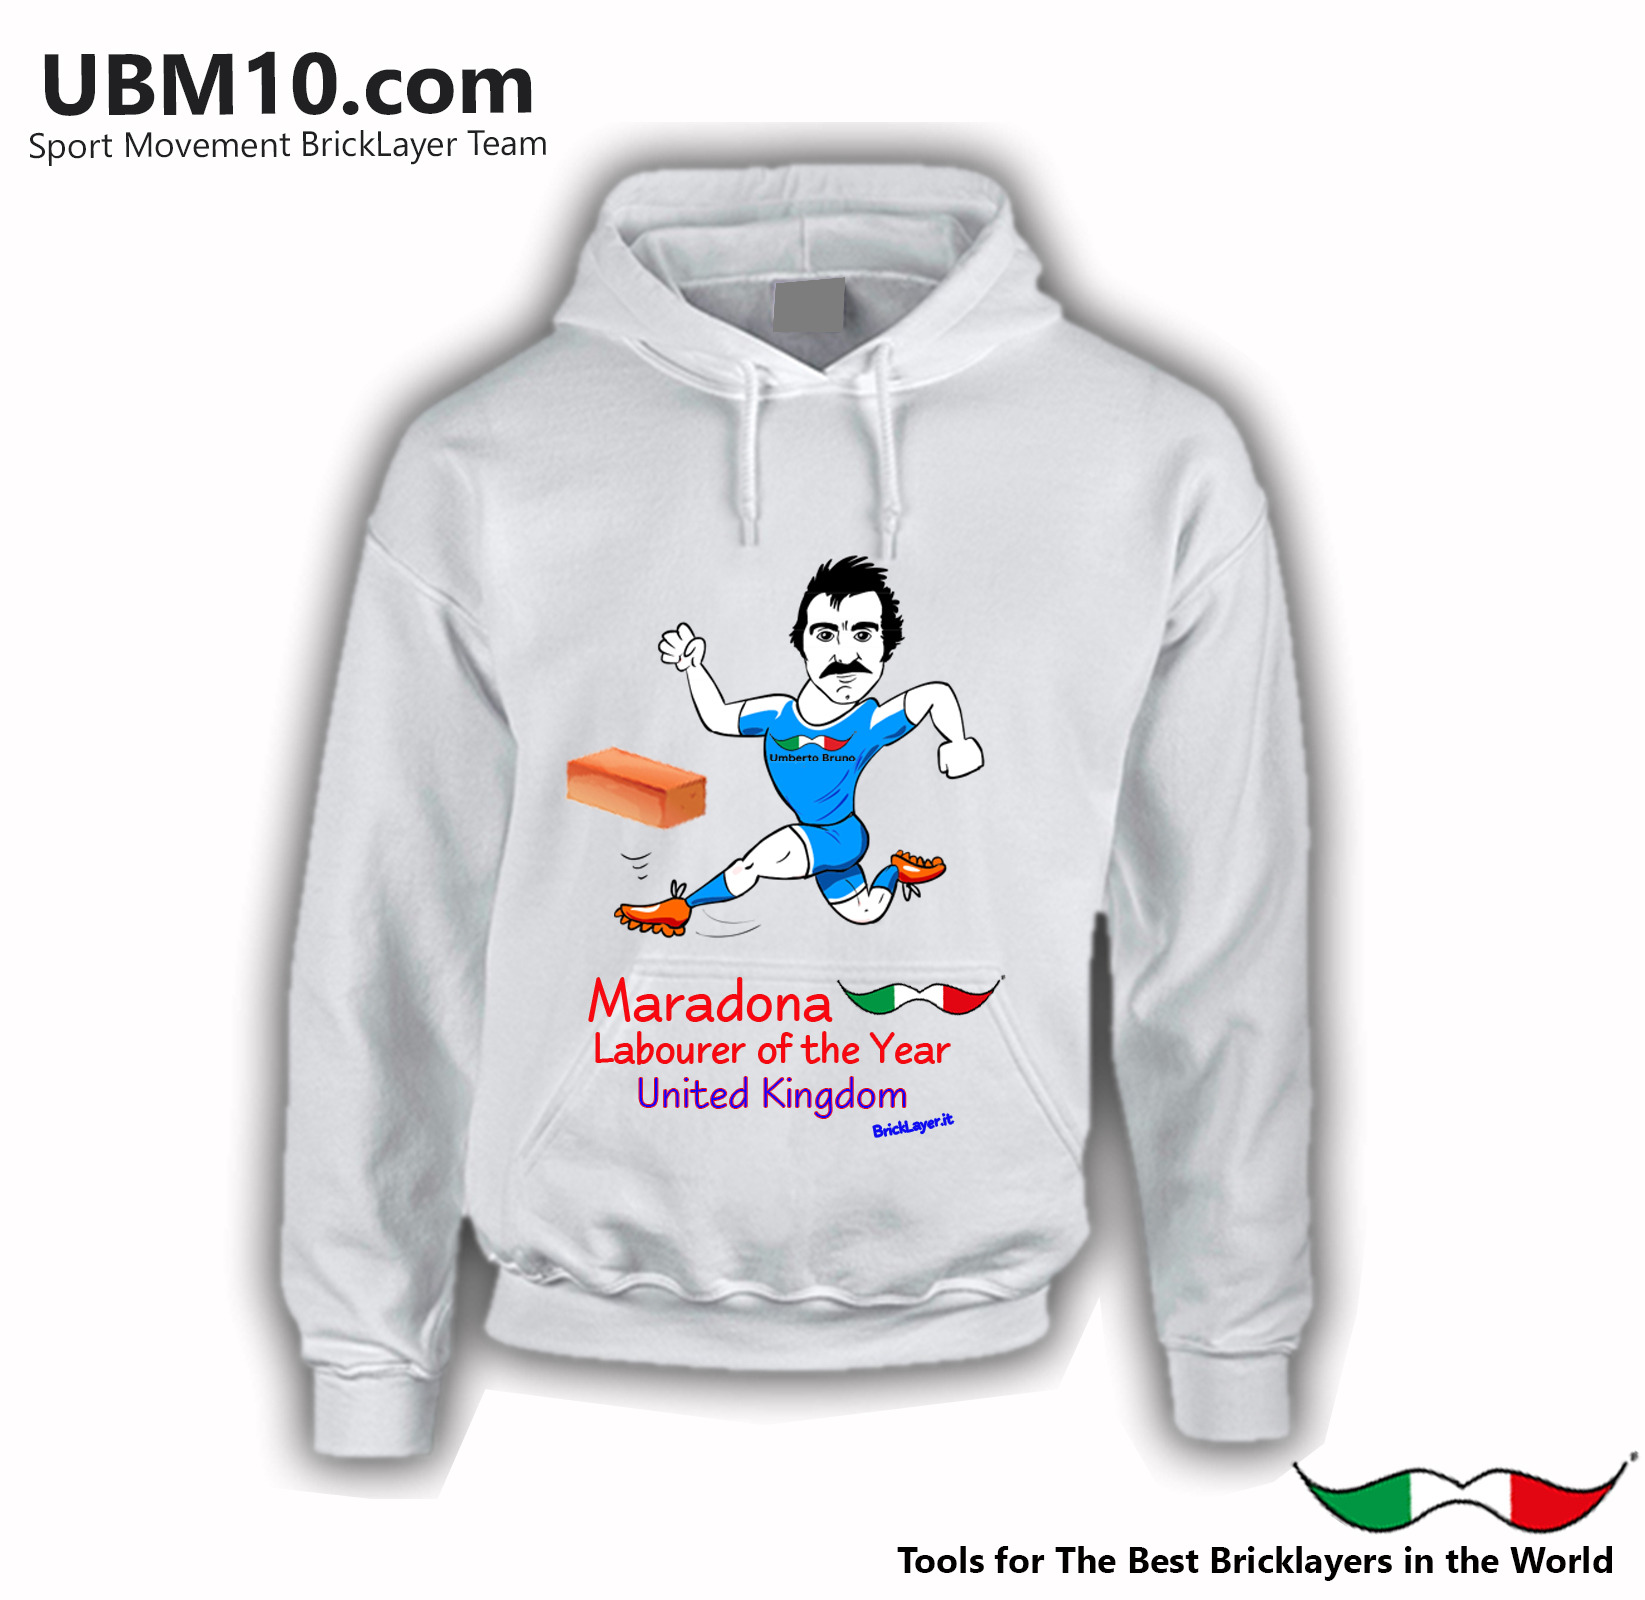 SweatShirt "He knew how to play UBM10 football but not like Diego, he preferred to play with bricks"